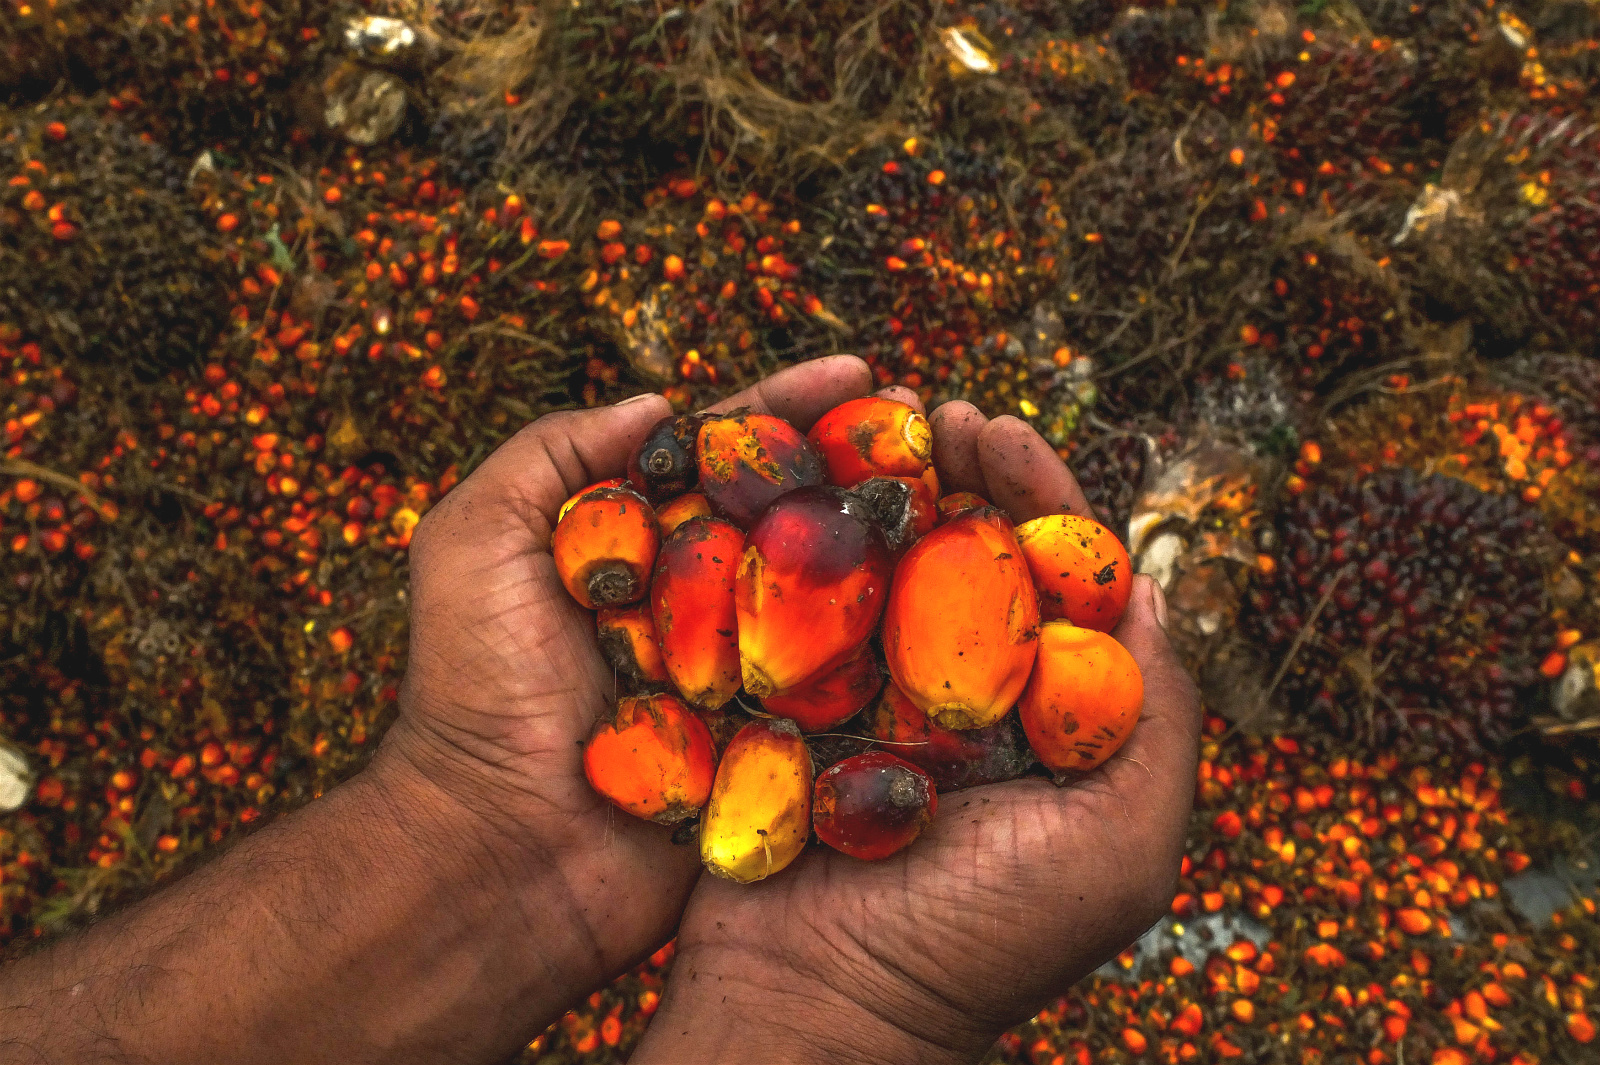  Palm  oil  The pros and cons of a controversial commodity 